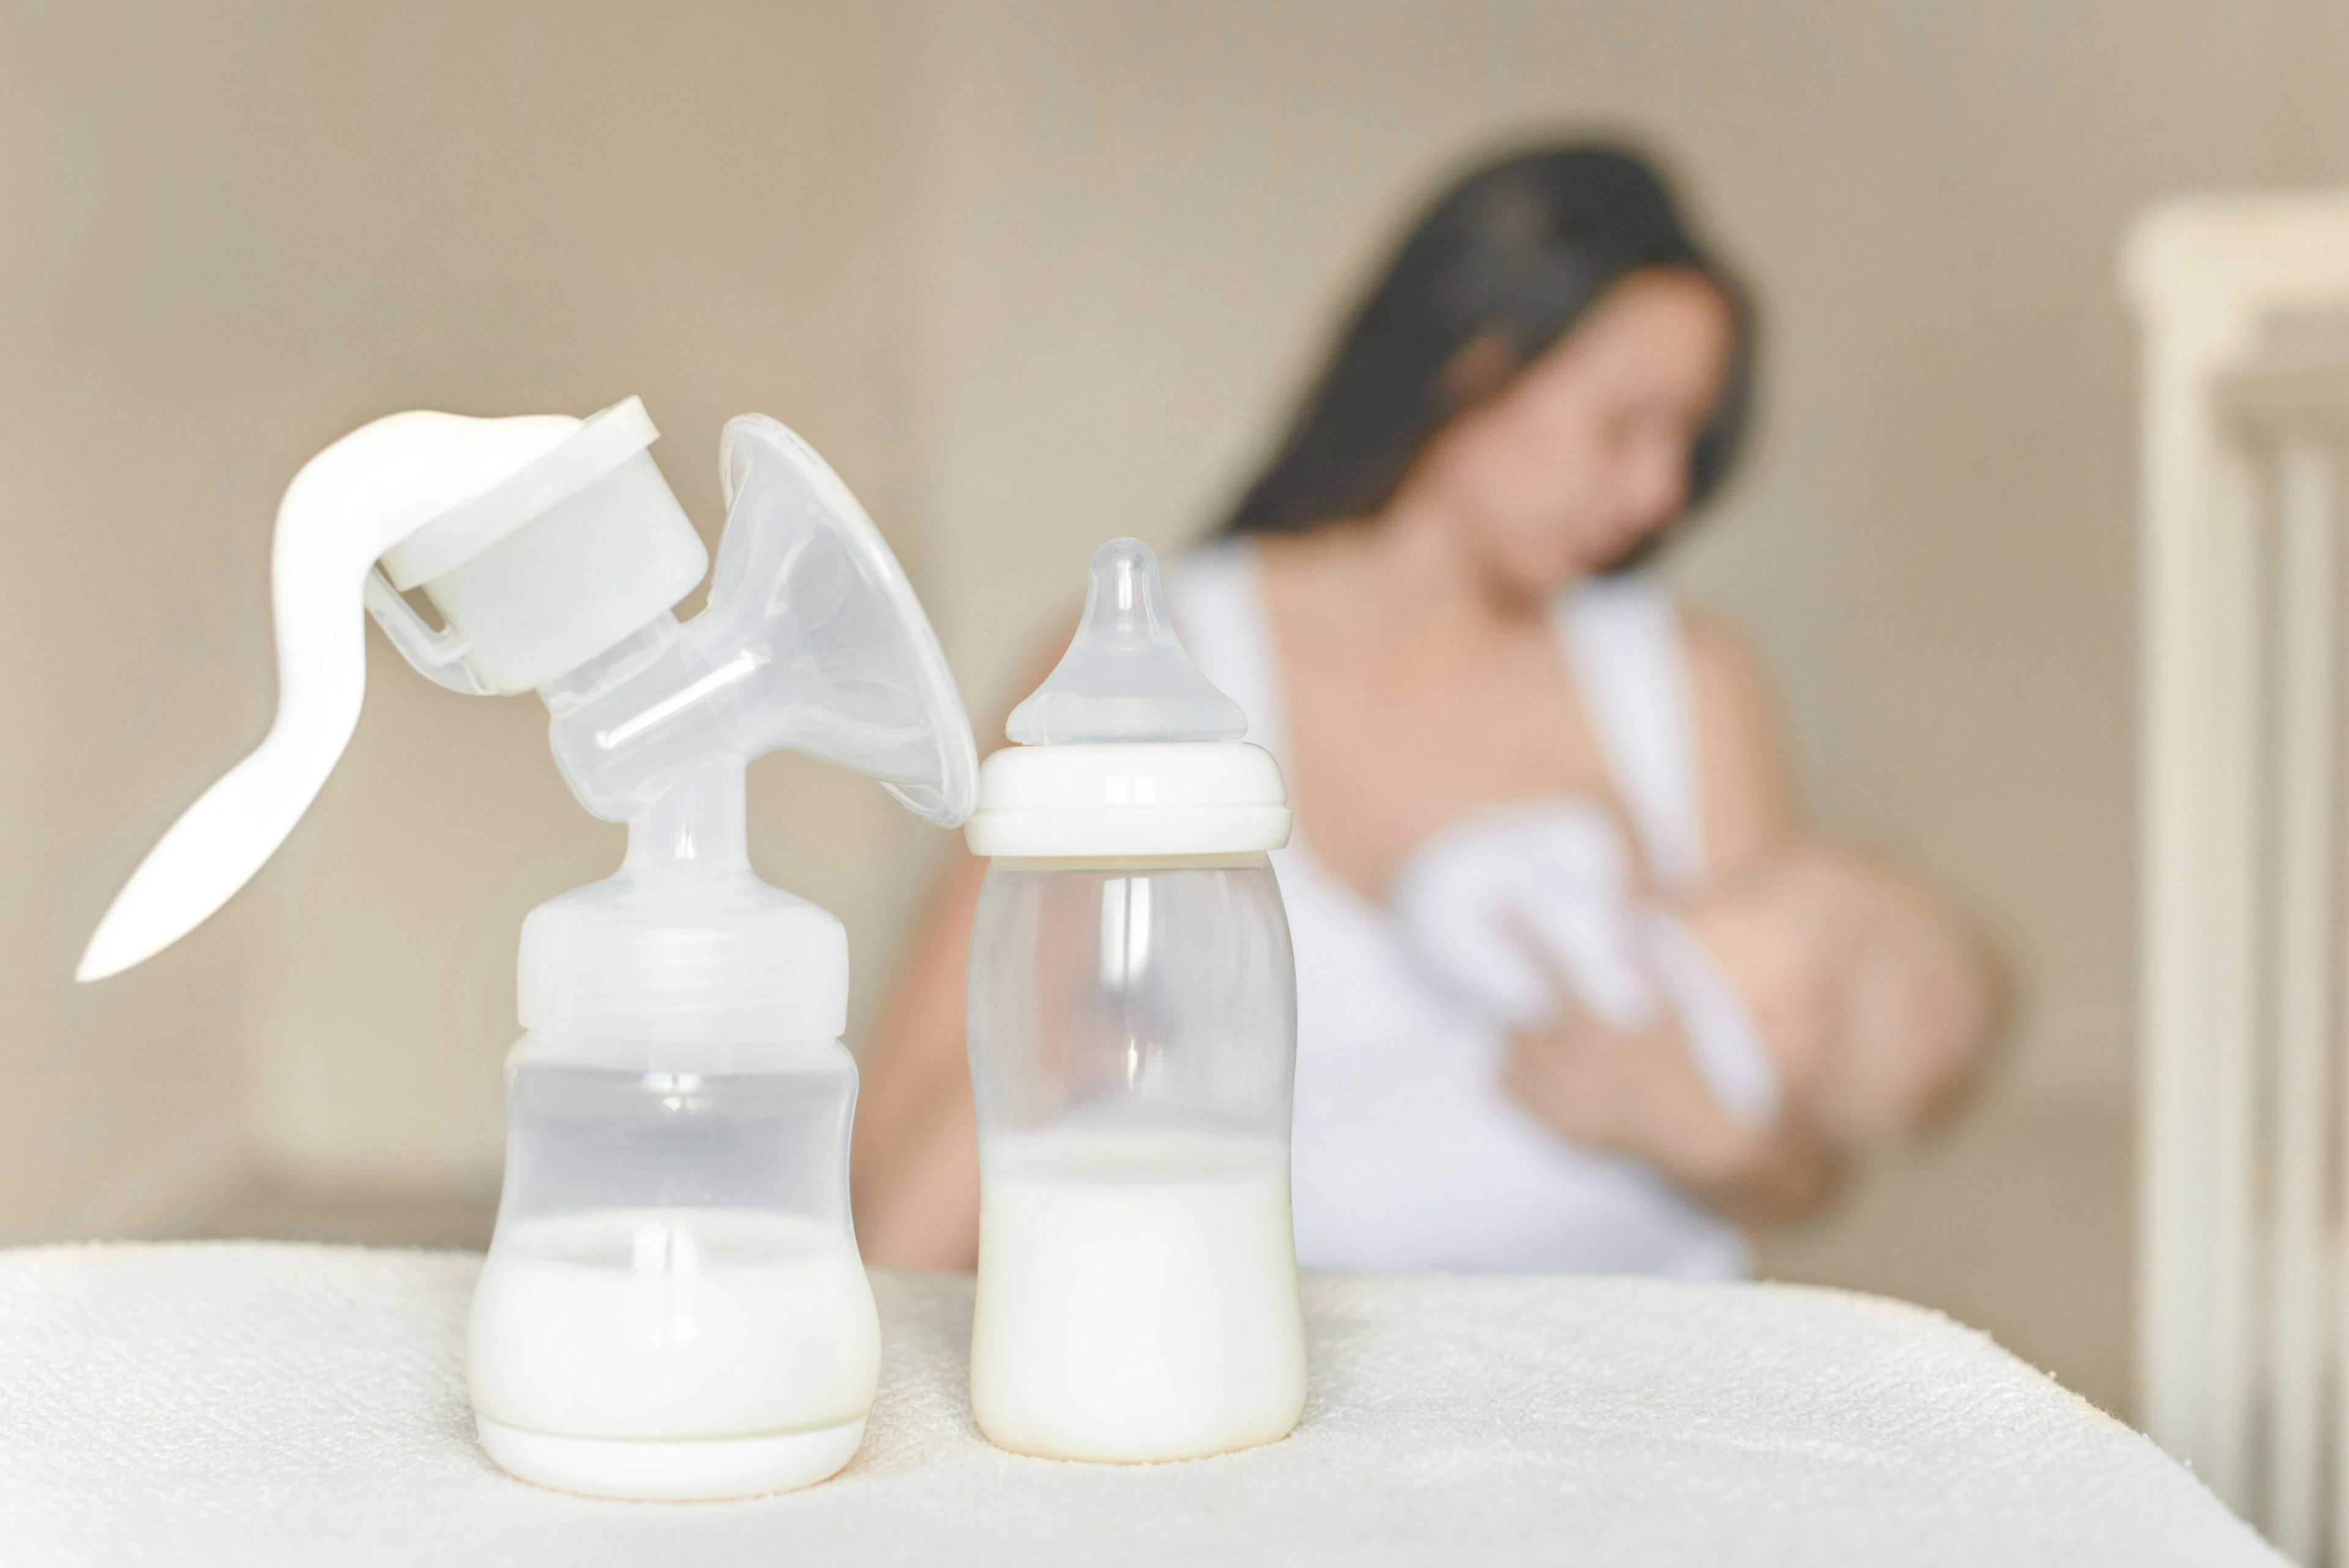 Manual breast pump and bottle with breast milk on the background of mother holding in her hands and breastfeeding baby. Maternity and baby care - Image credit: evso | stock.adobe.com